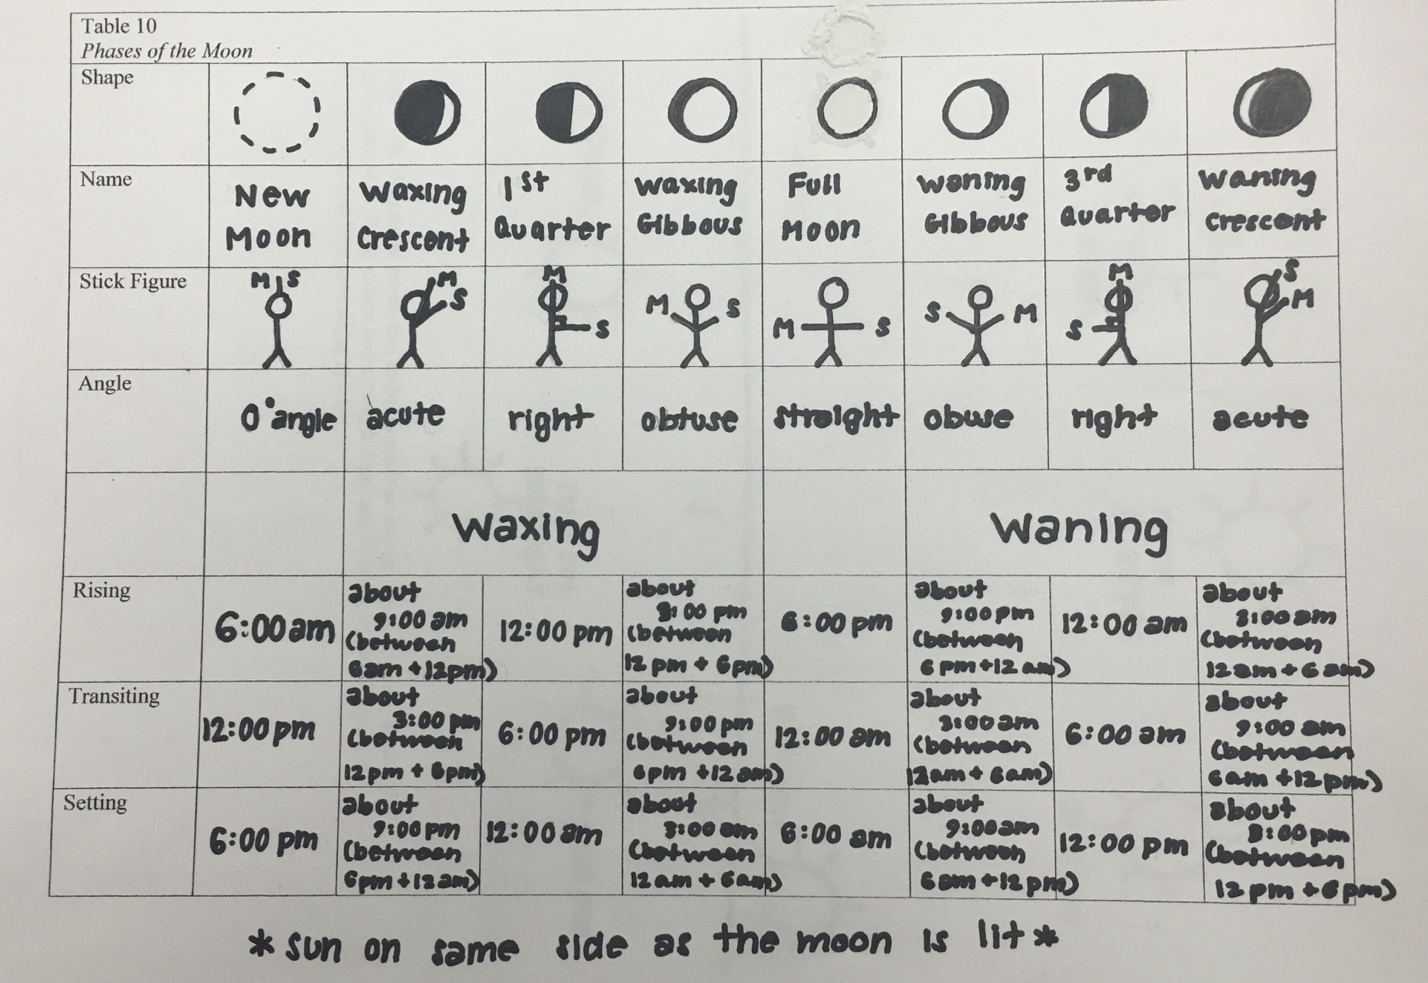 Student’s entries in a table summarizing findings about the phases of the Moon